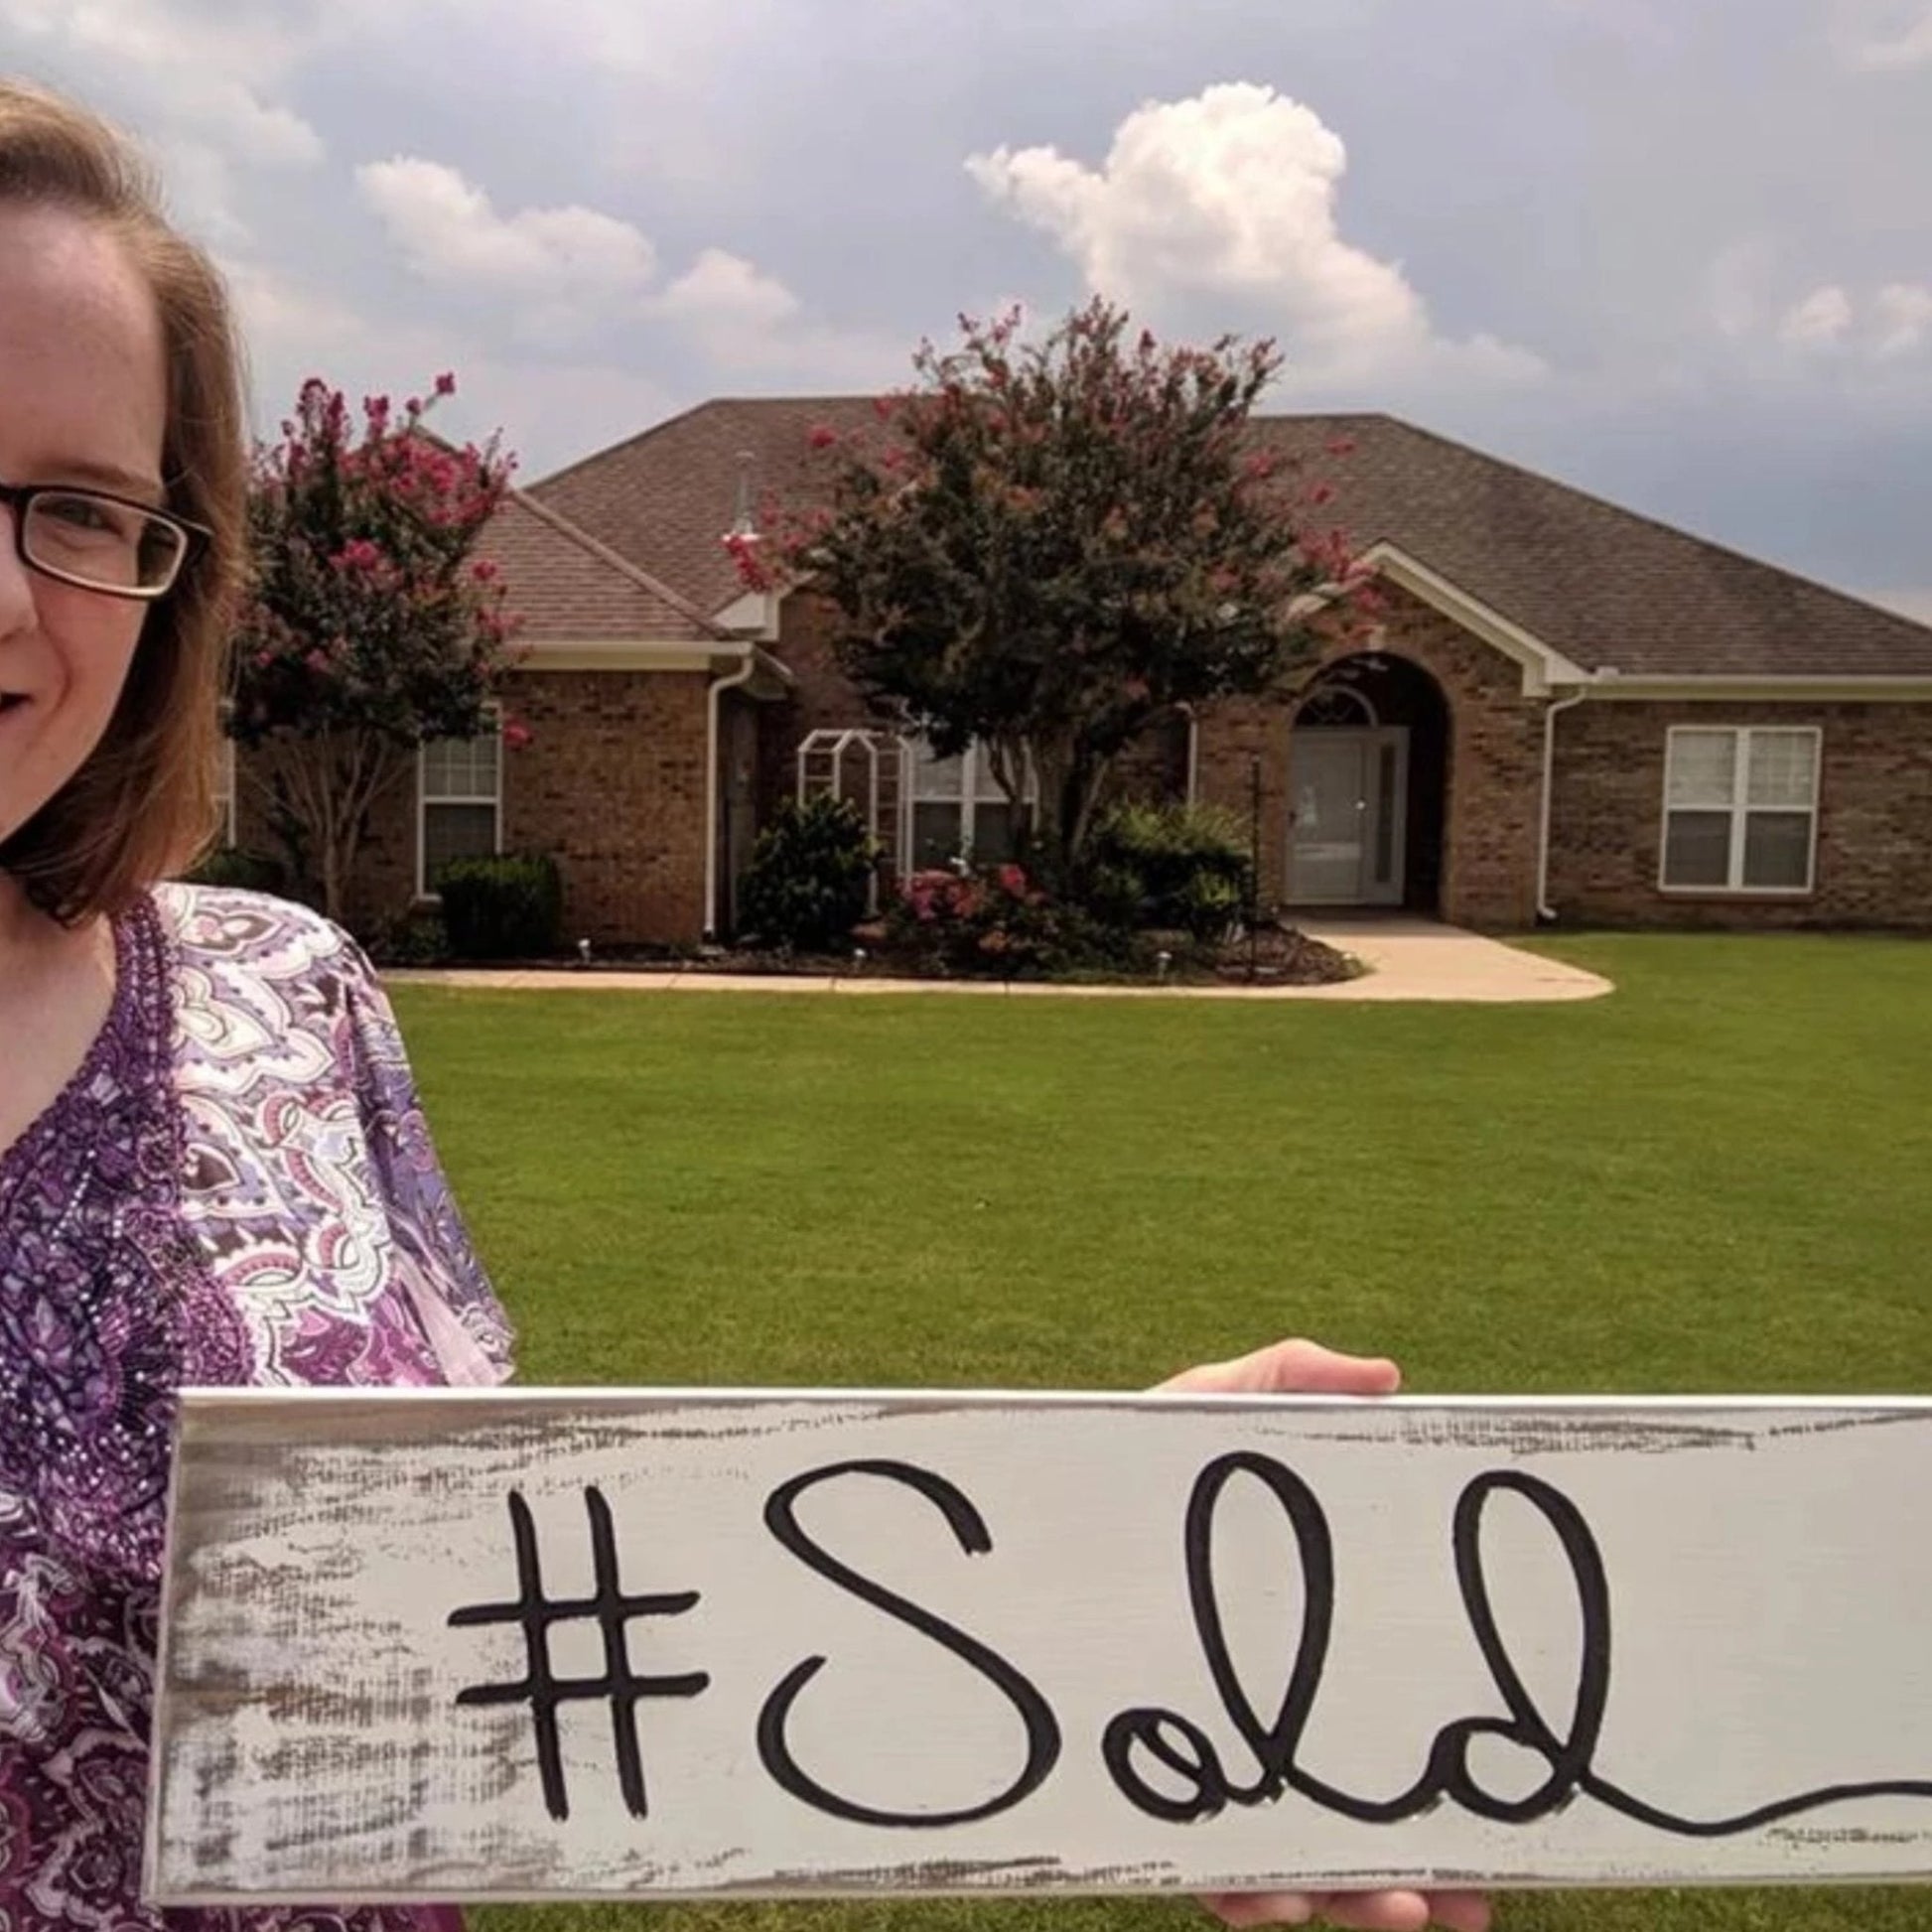 sold sign for real estate agent